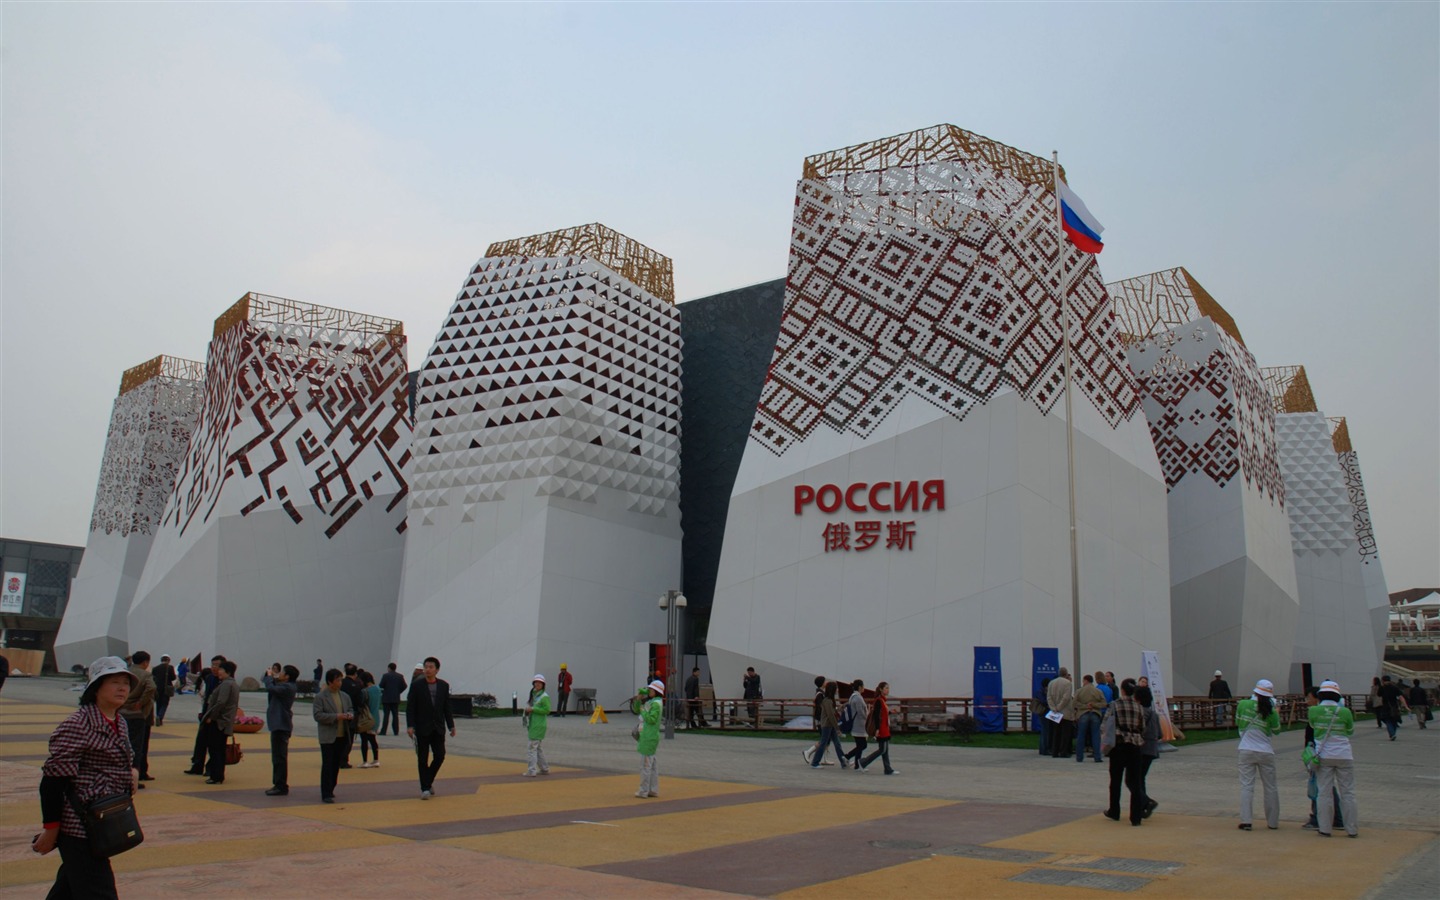 Commissioning of the 2010 Shanghai World Expo (studious works) #20 - 1440x900